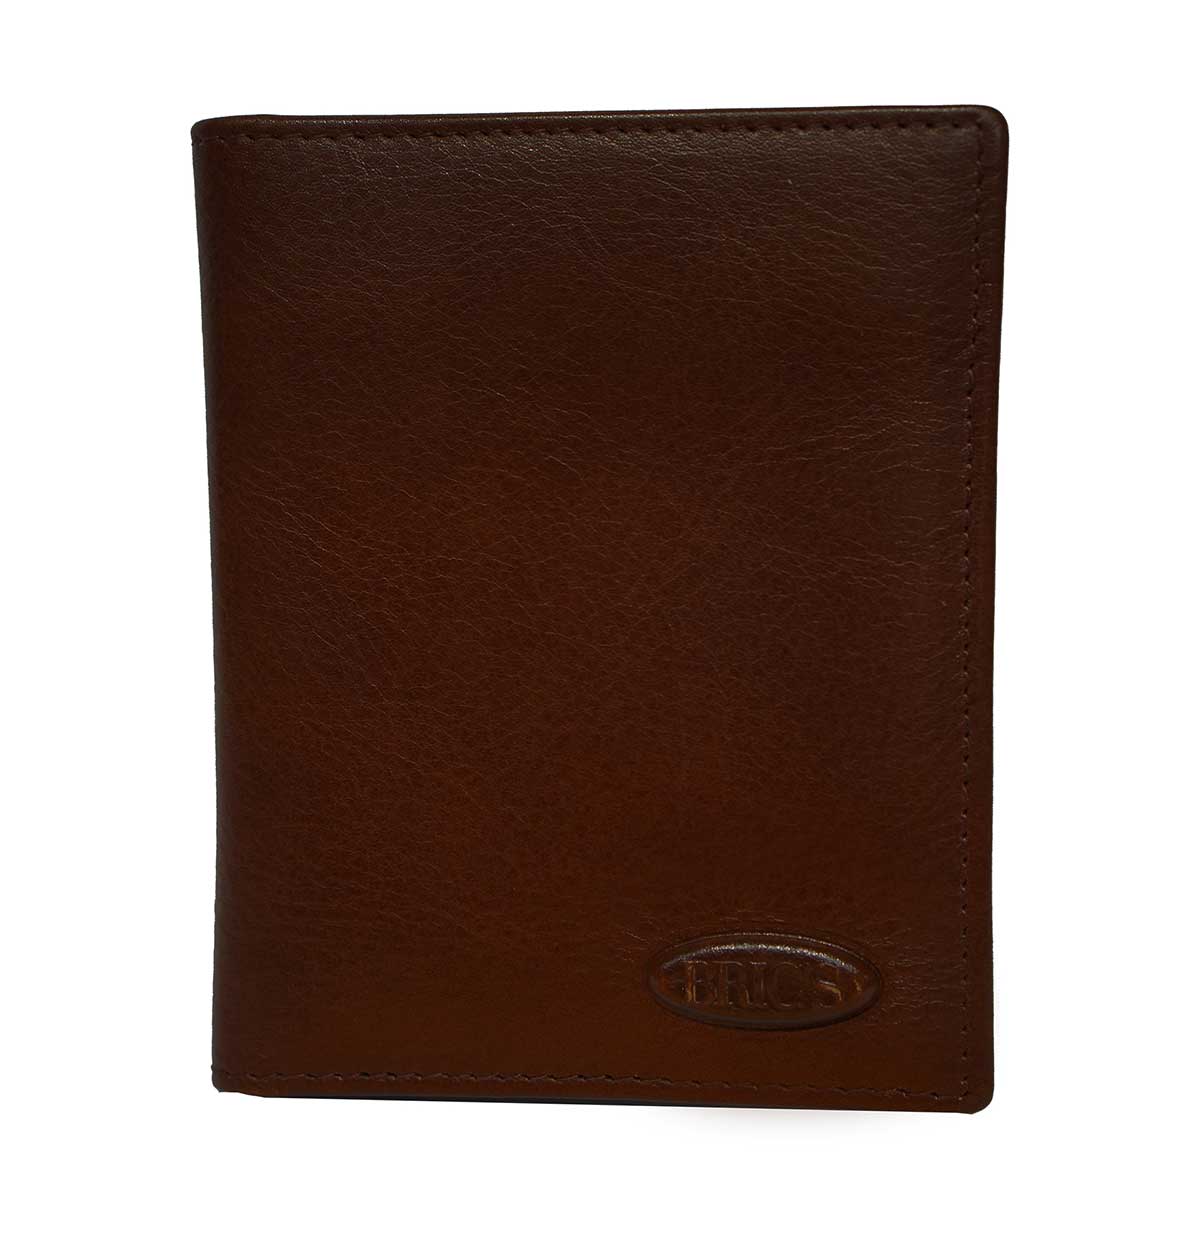 Monte Rosa Vertical Wallet With Id by Brics (Color: Dark Brown)